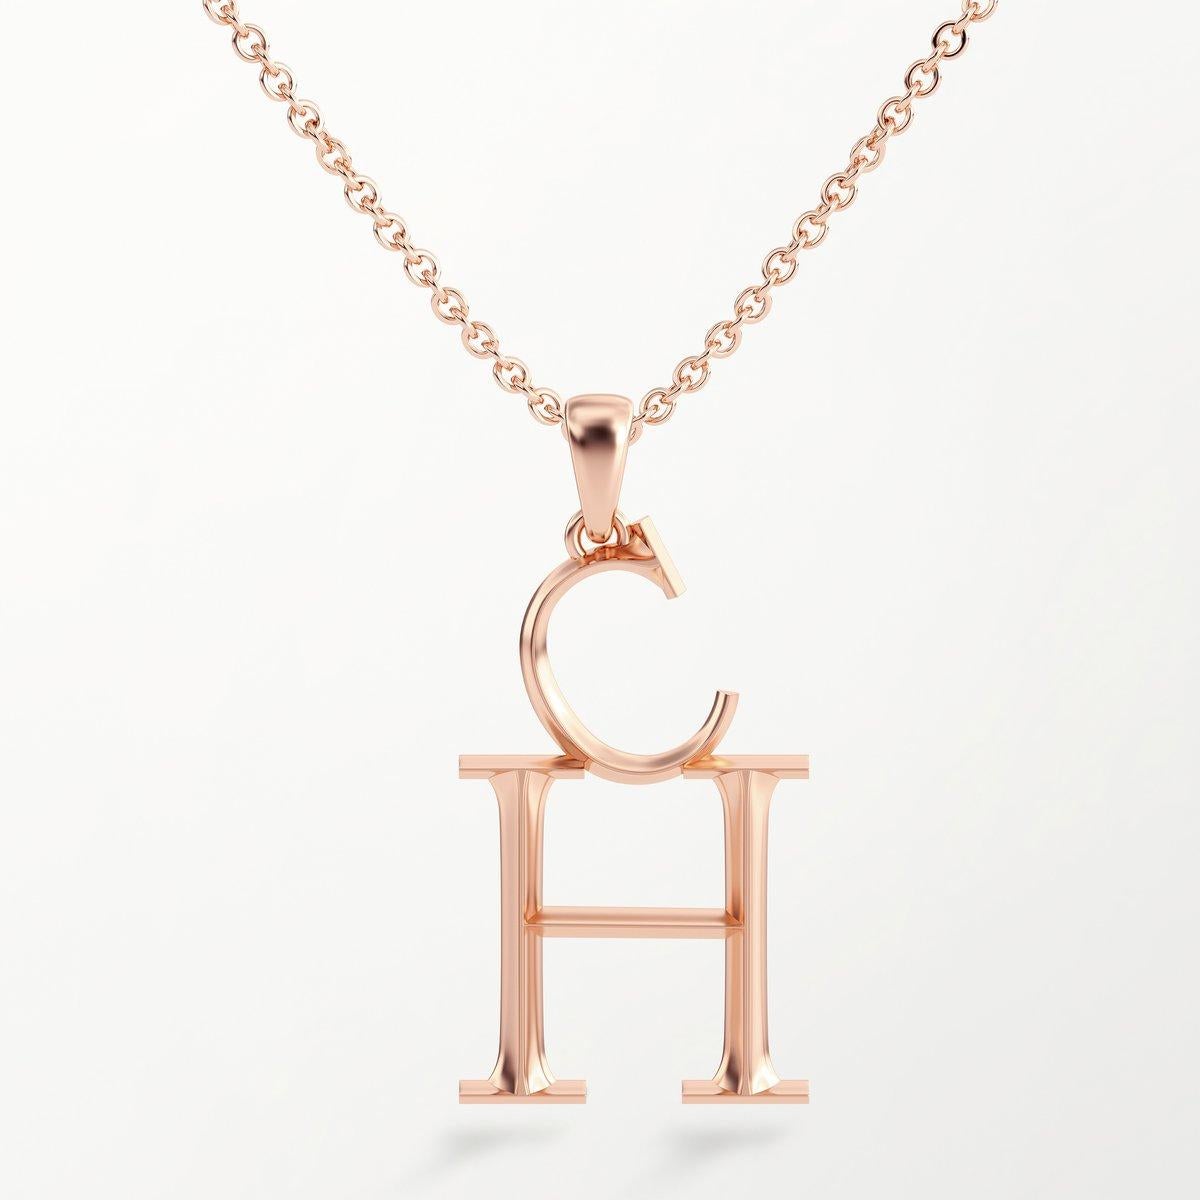 Medium Initial Pendant Necklace in 18k Yellow, White or Rose Gold 17